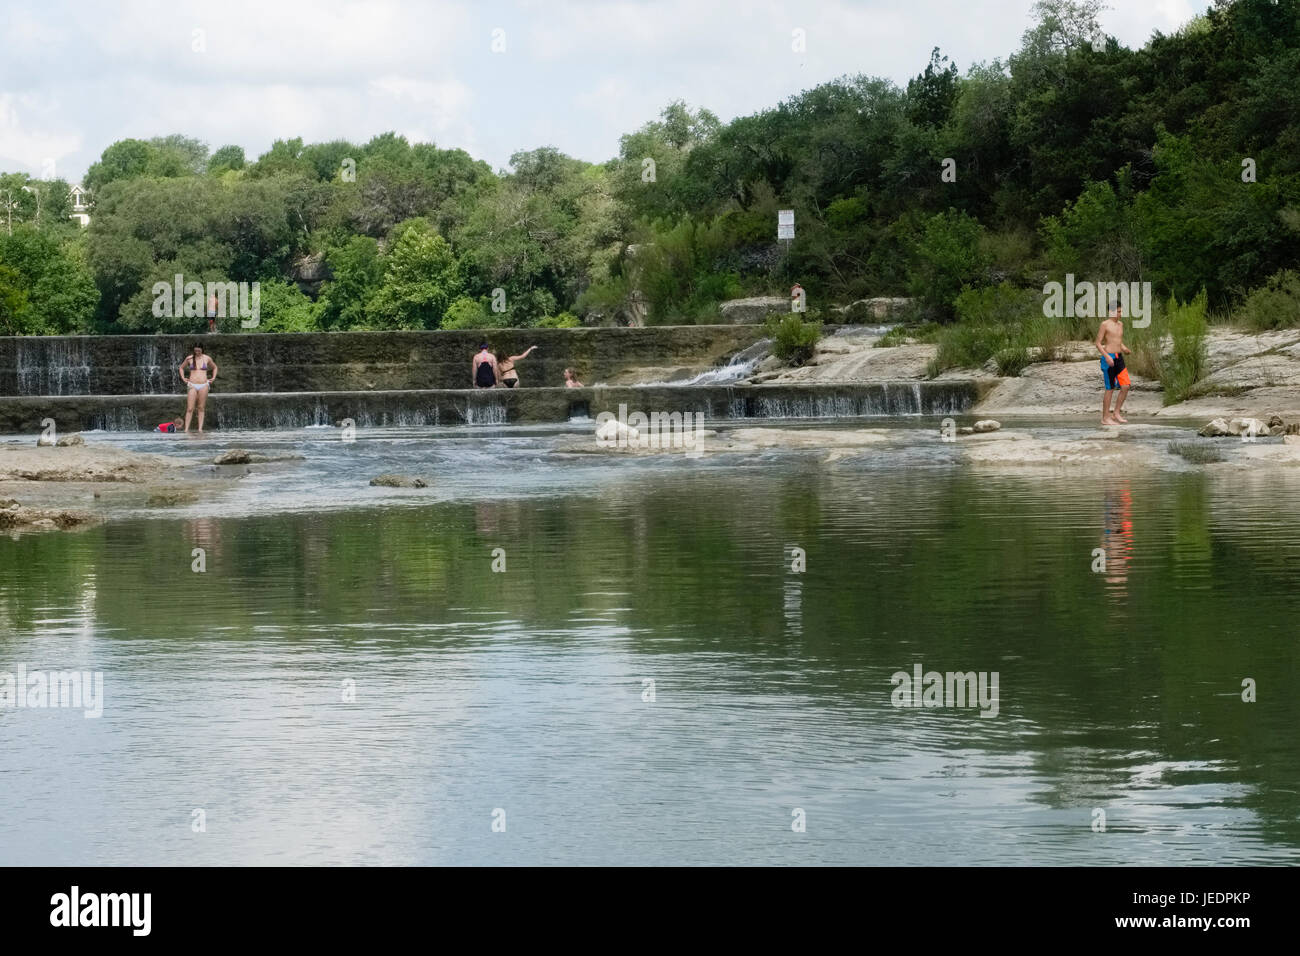 Swimming in a local community swimming hole known as Blue Hole on the San Gabriel River in Georgetown, Texas USA Stock Photo